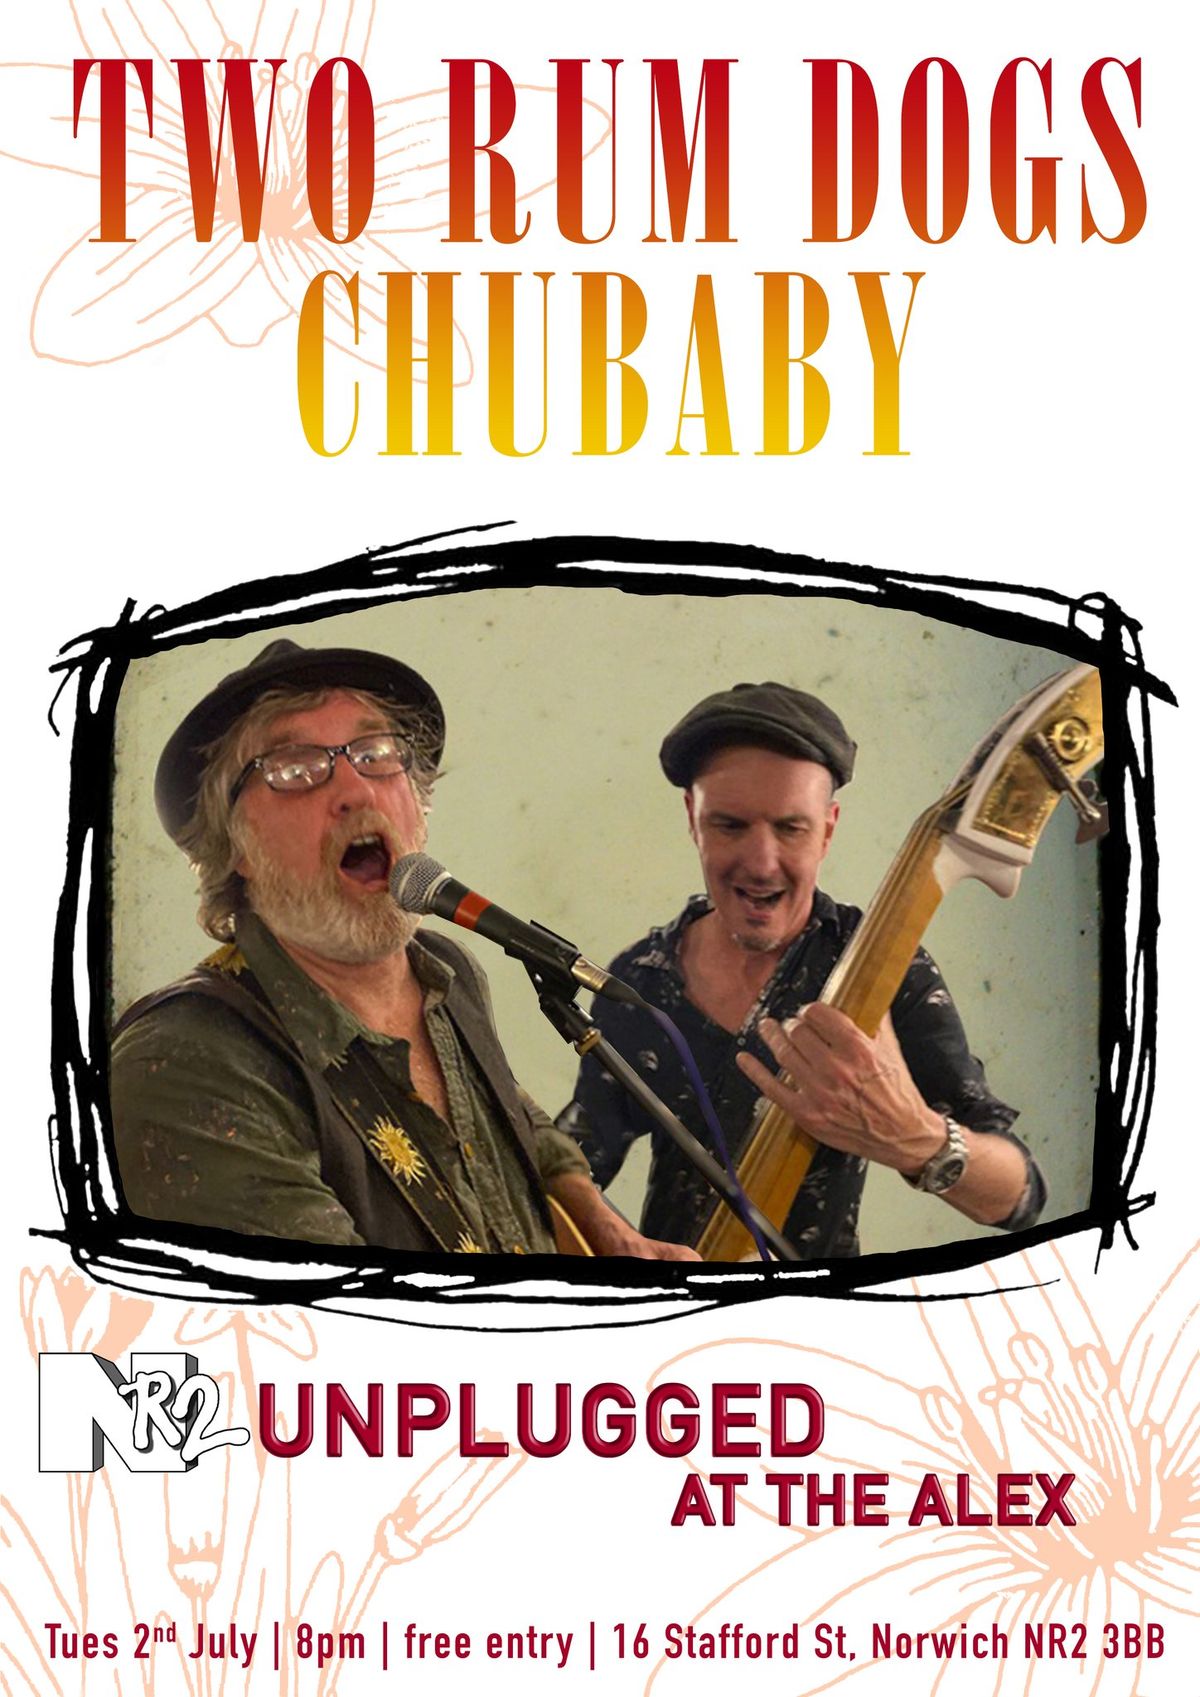 Two Rum Dogs | Chubaby | NR2 Unplugged at the Alex